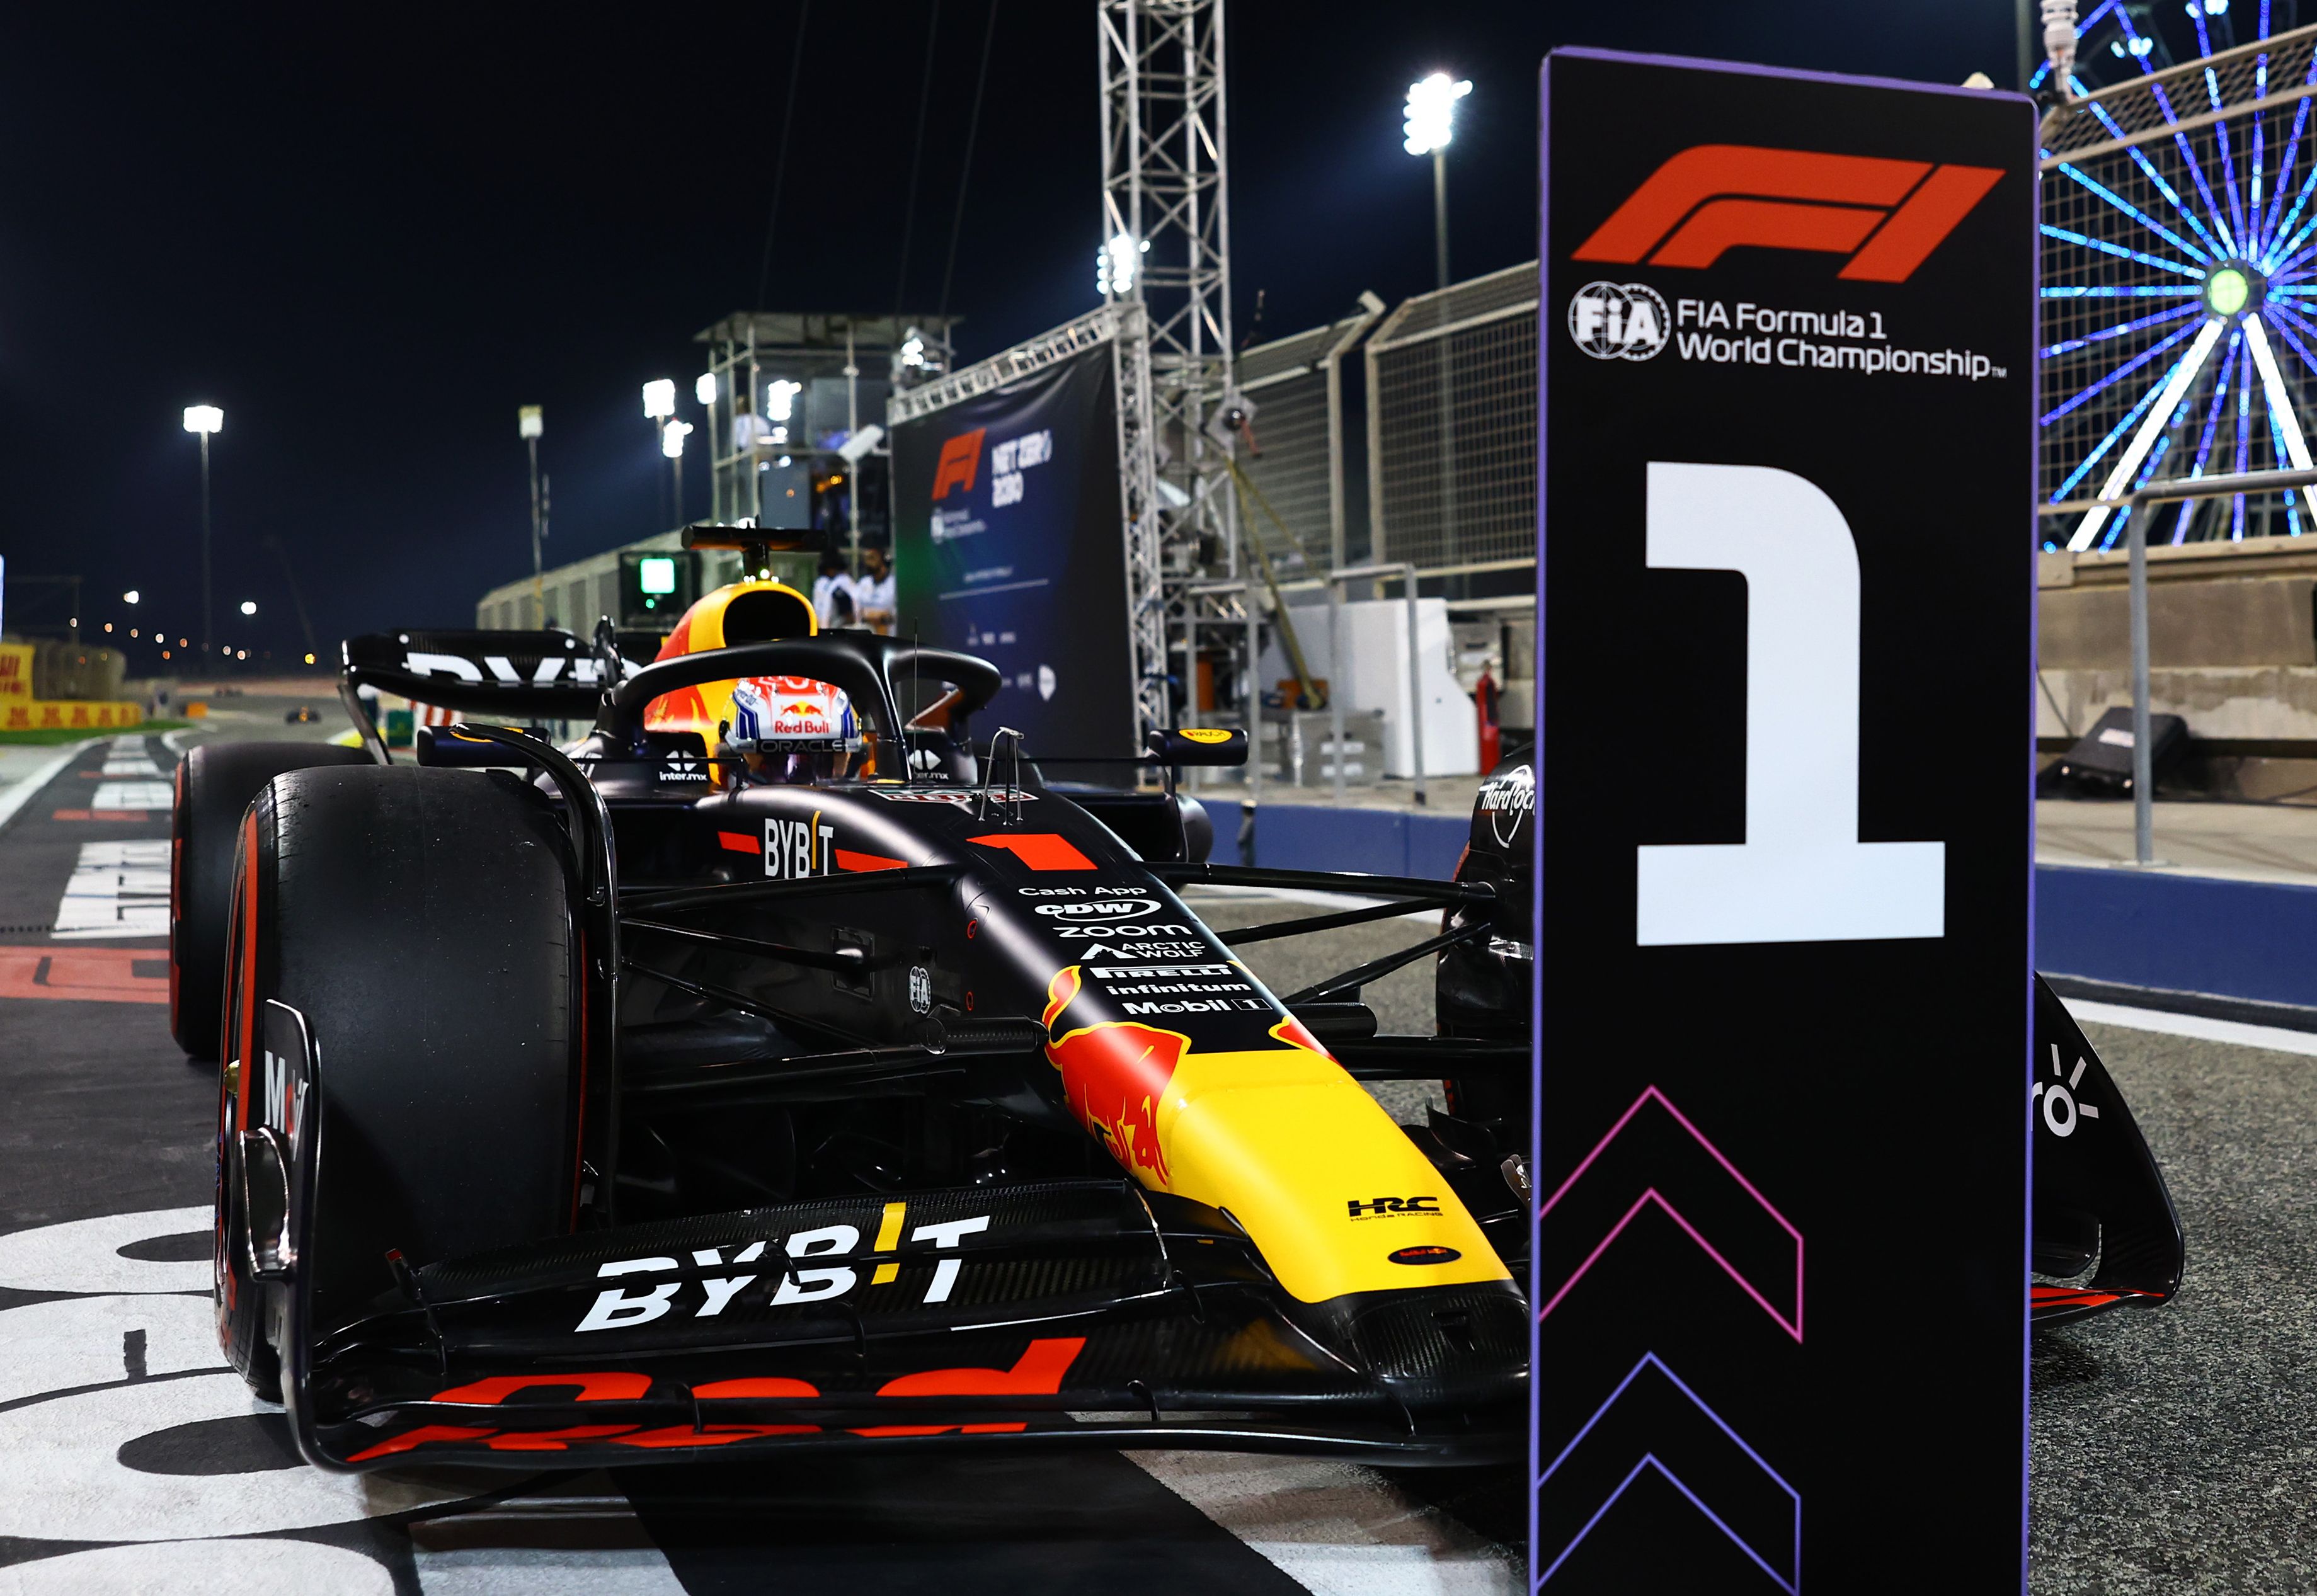 F1 Bahrain Grand Prix Qualifying Max Verstappen, Red Bull Surge to Pole Position